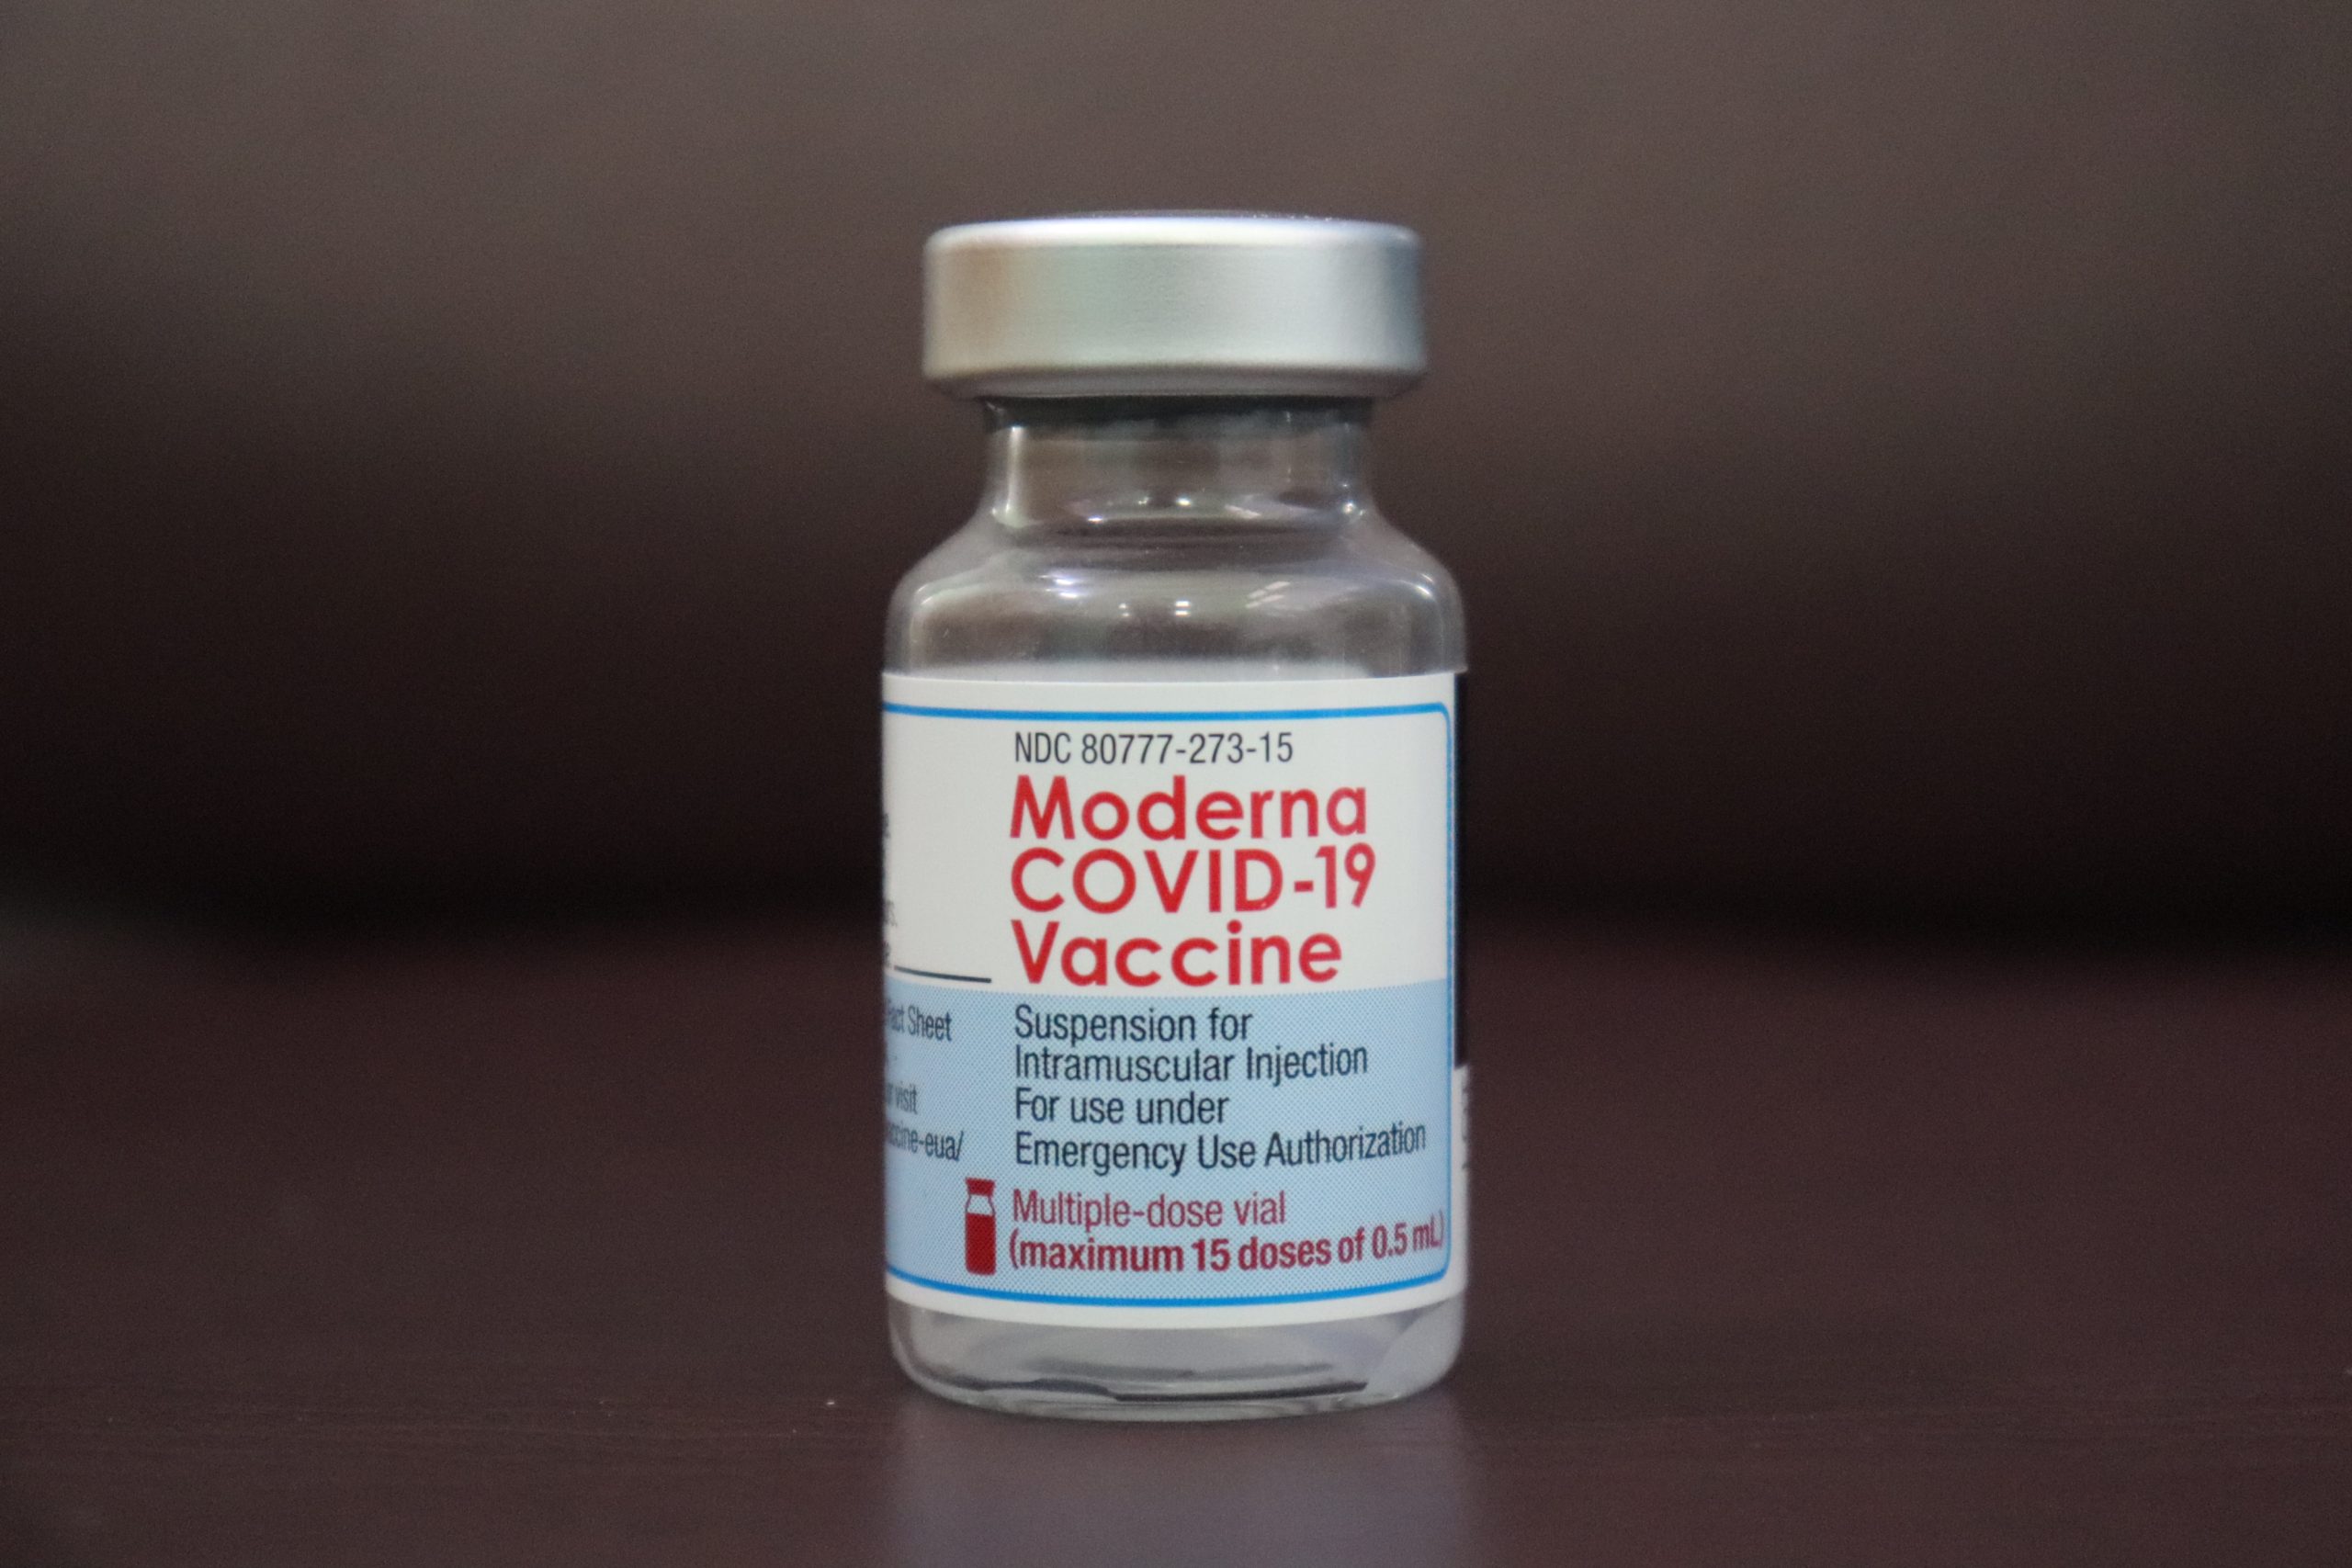 Moderna's COVID-19 vaccine or mRNA-1273 is a COVID-19 vaccine developed by the National Institute of Allergy and Infectious Diseases, the Biomedical Advanced Research and Development Authority, and Moderna.